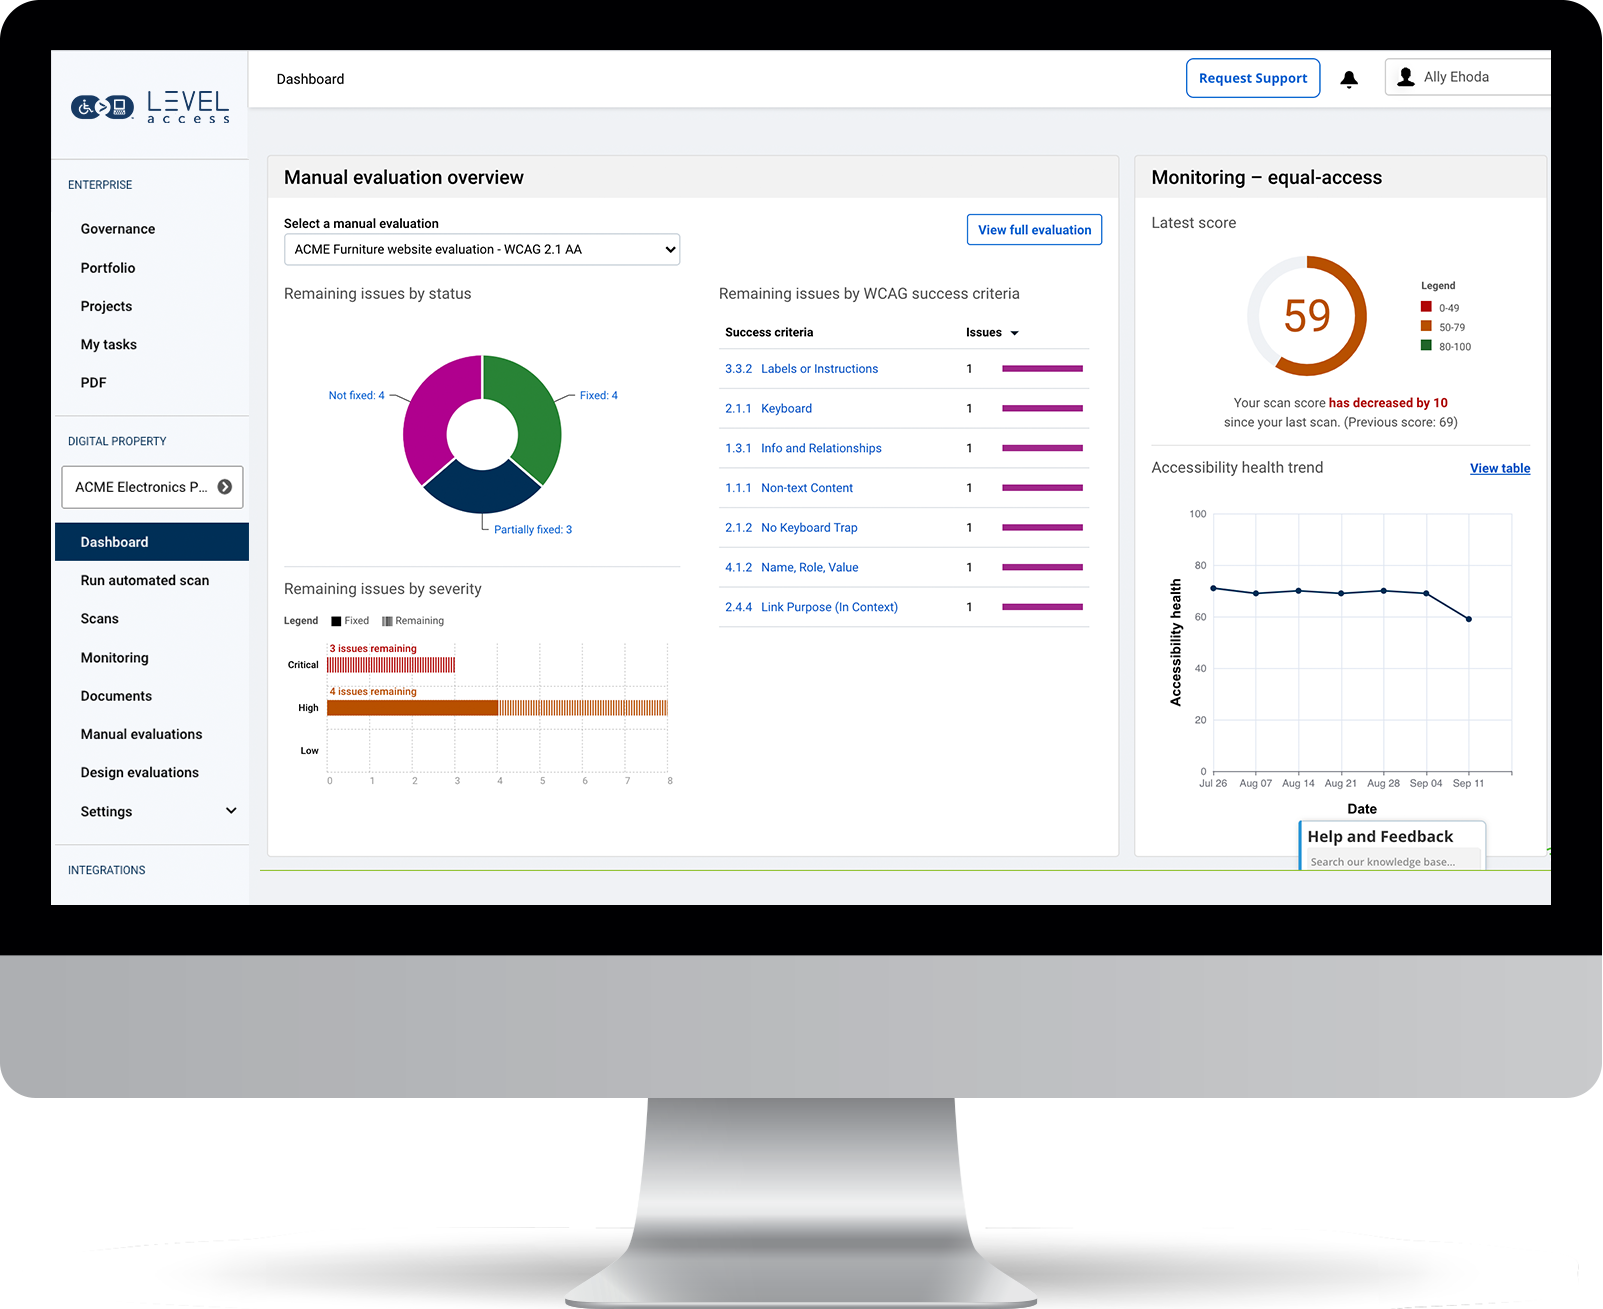 The Level Access Platform is your central source for tooling, scanning, monitoring, and reporting. And it’s integrated with familiar systems like Jira and Azure DevOps, flowing smoothly into existing workflows.